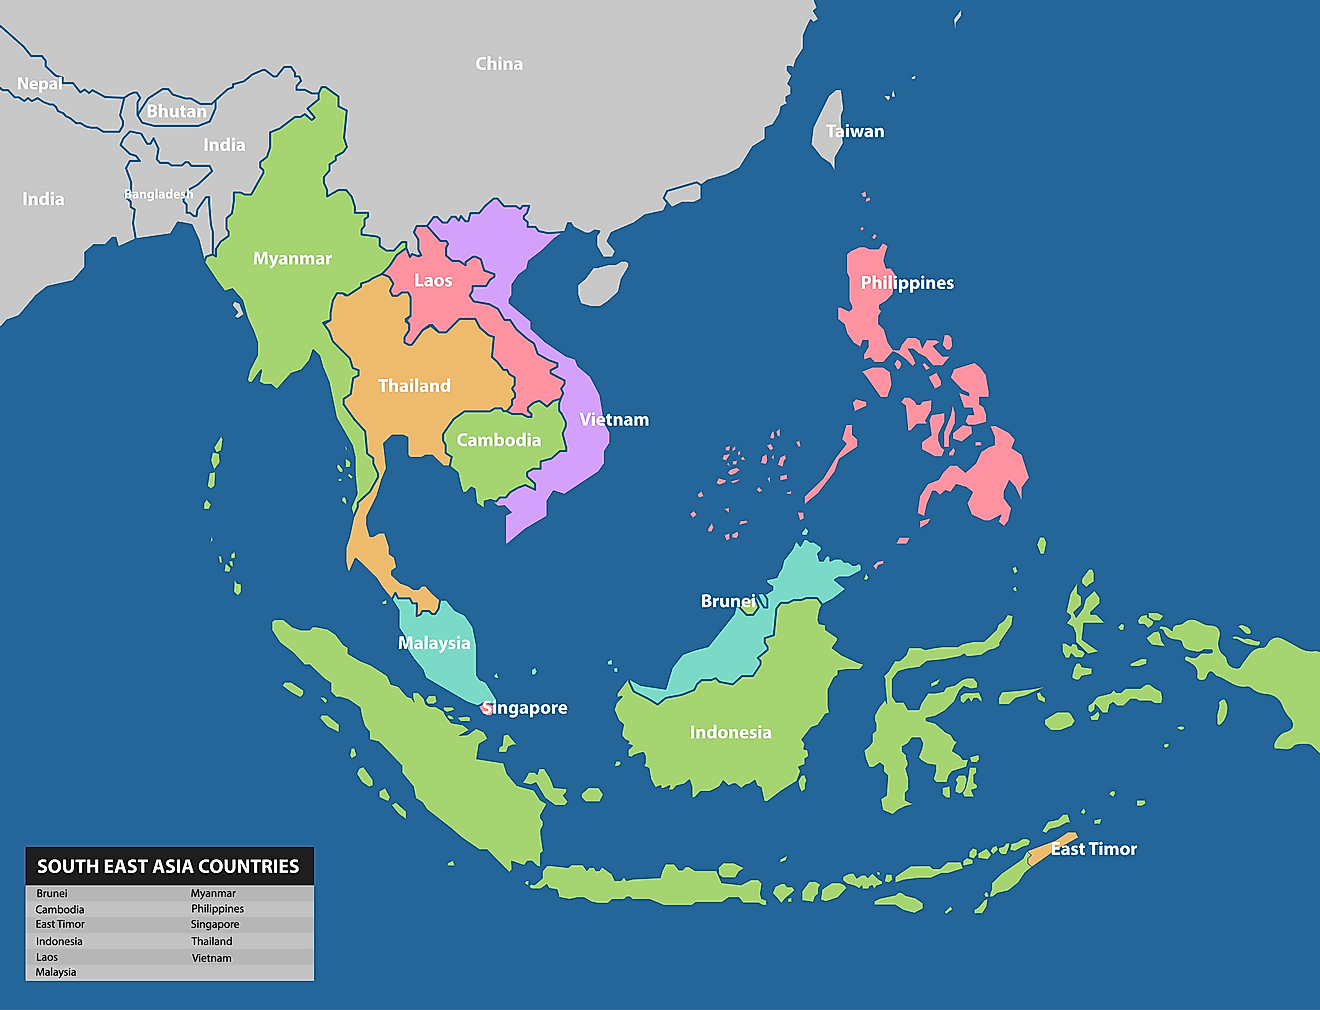 Why is Southeast Asia different?